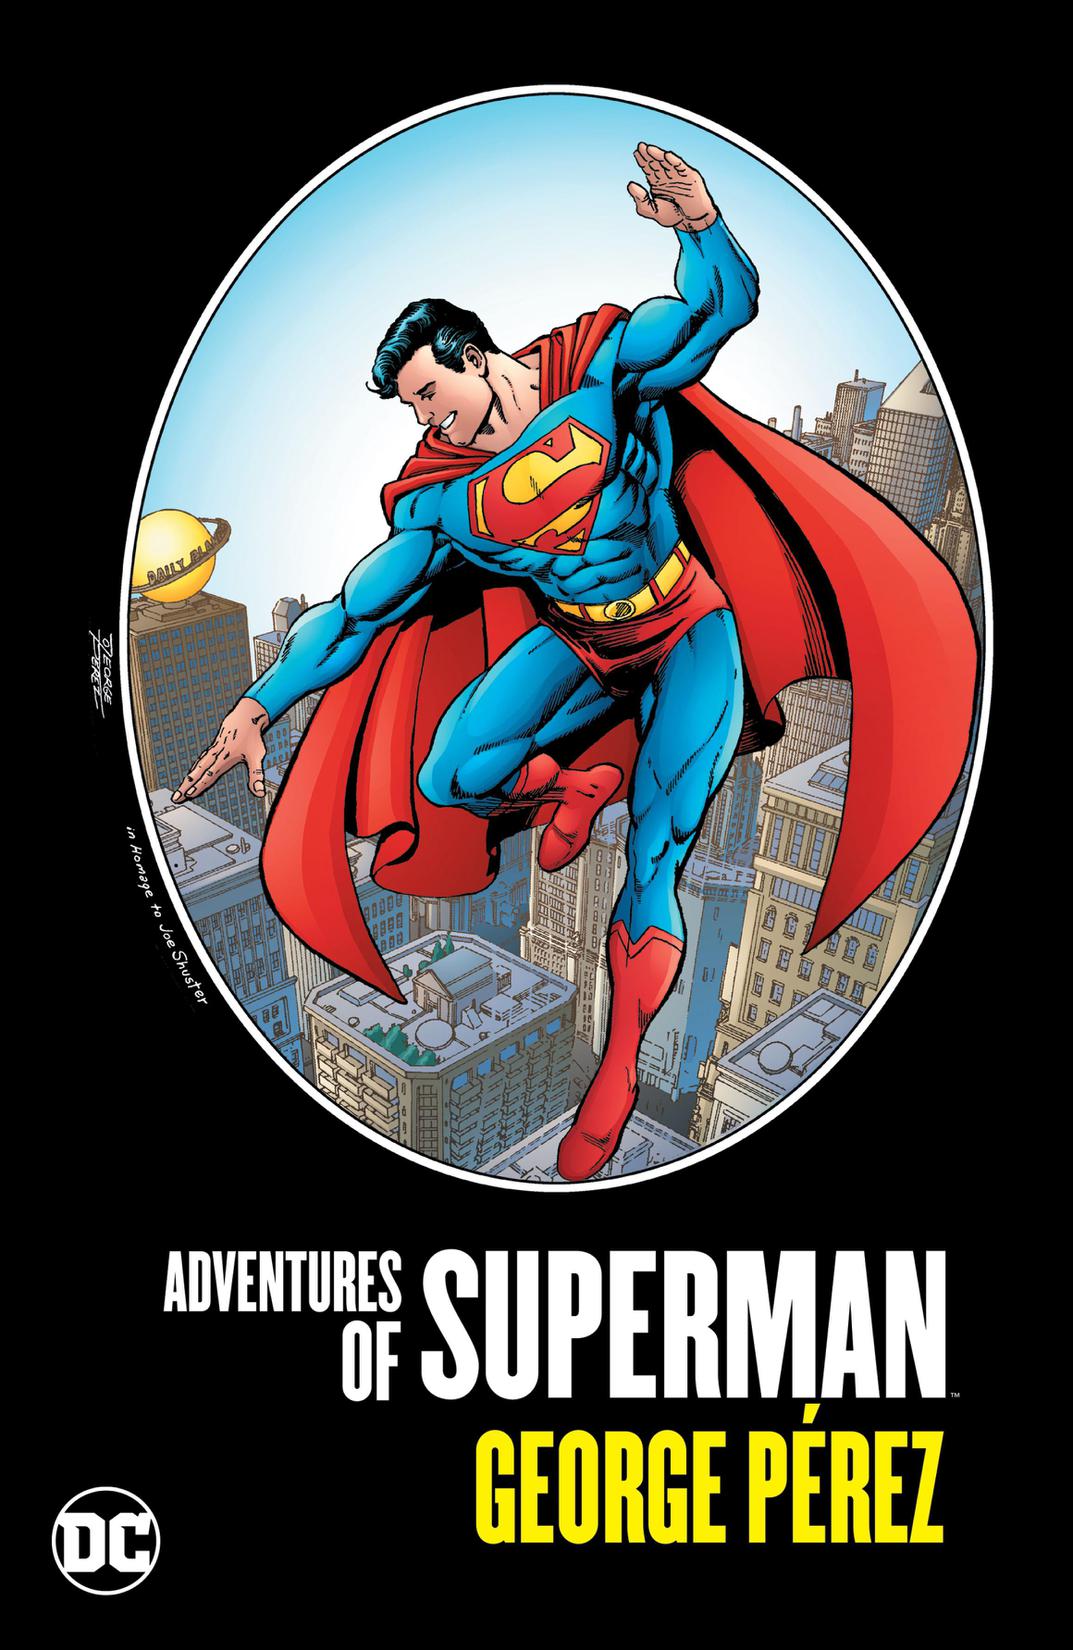 Adventures of Superman by George Perez preview images